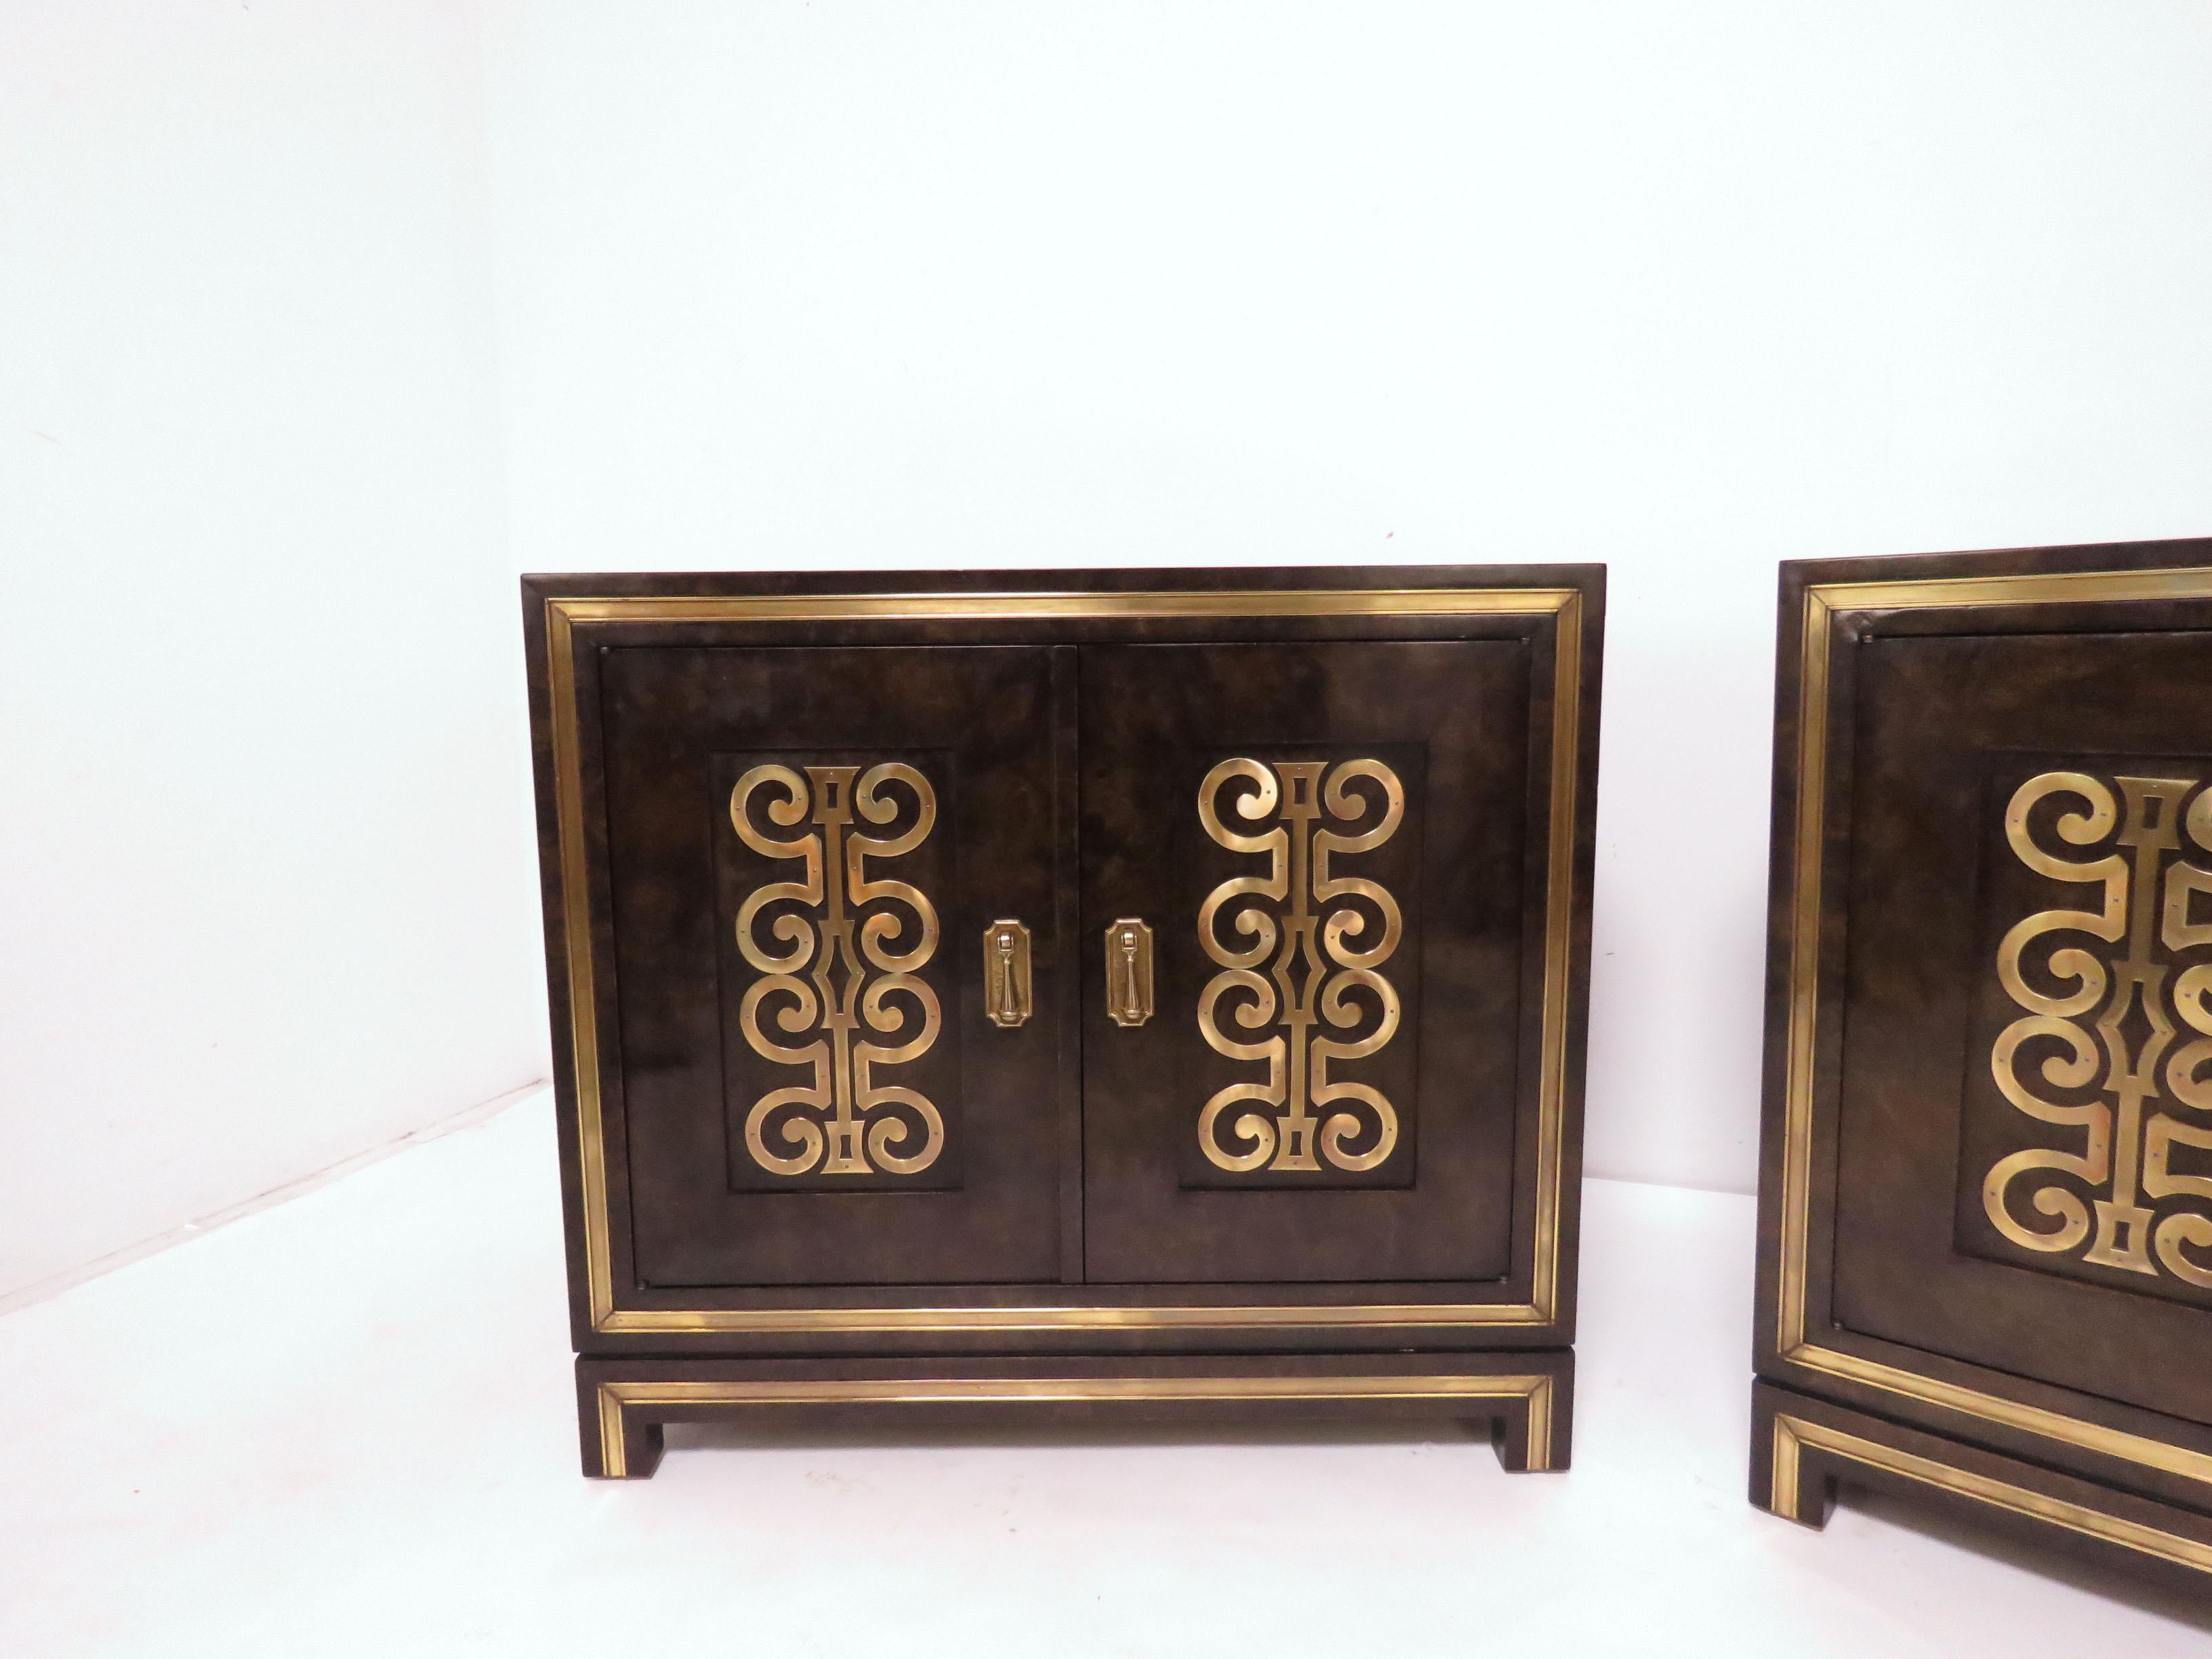 Pair of chests in amboyna burl with brass scroll panels and trim, by William Doezema for Mastercraft, circa 1960s.